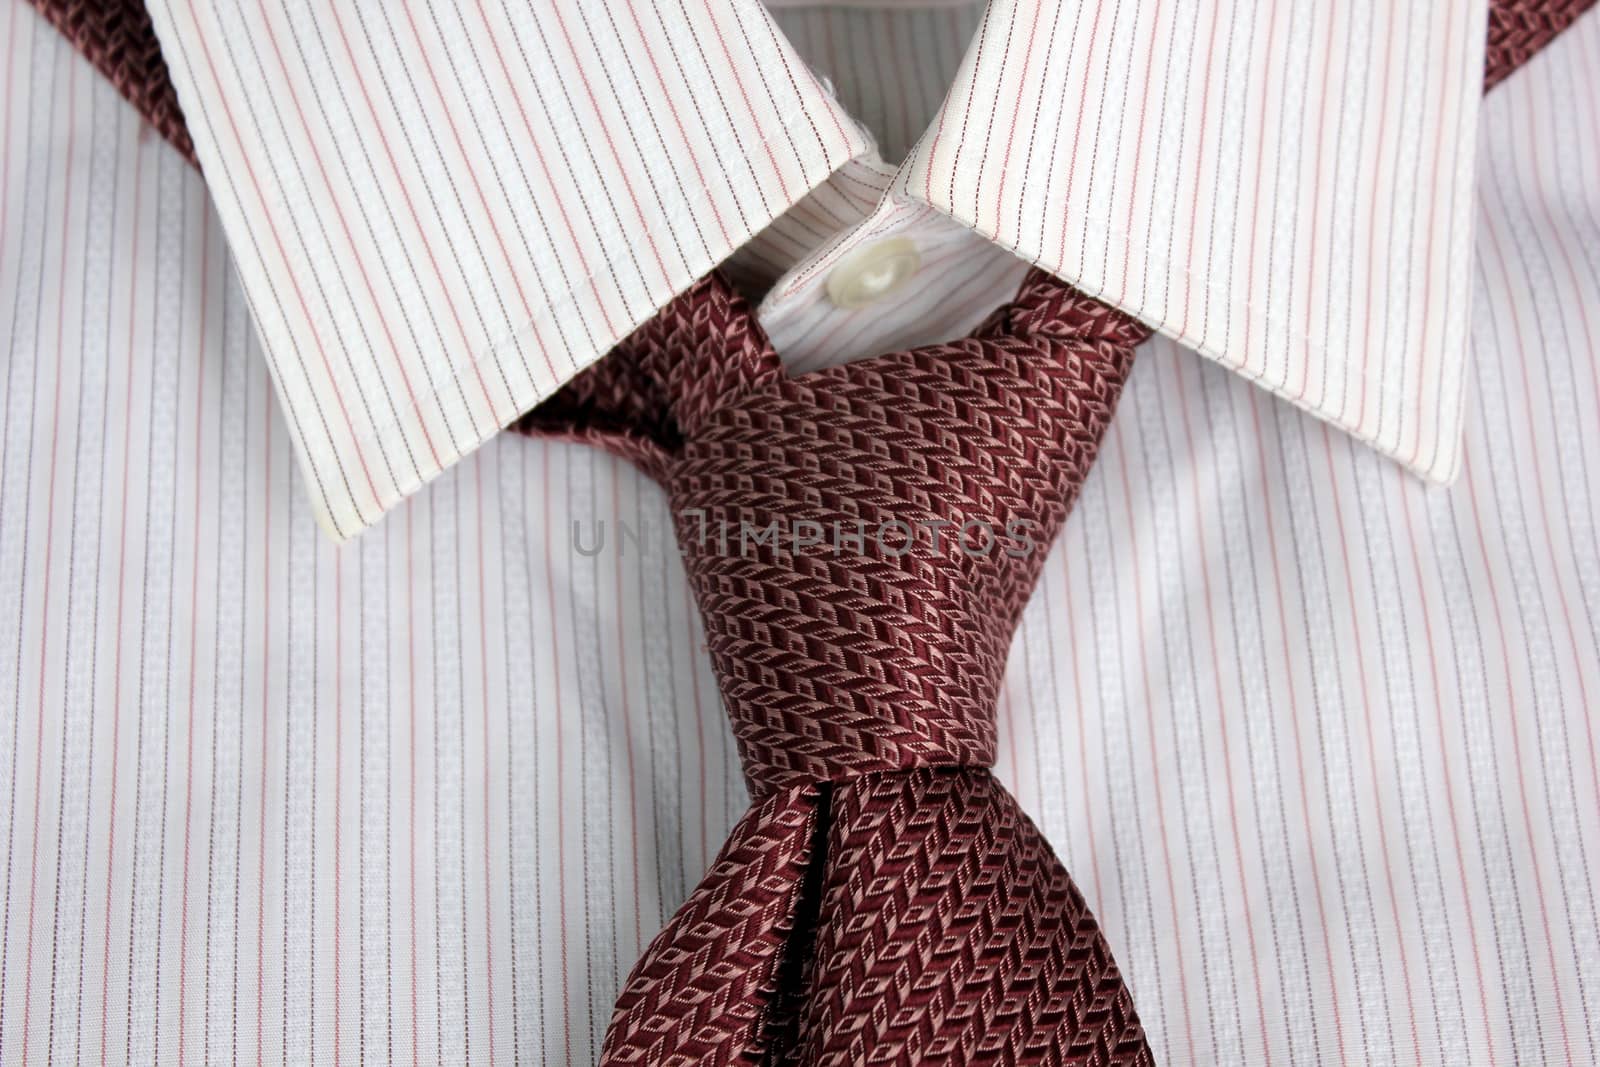 The tie tied in knot round a shirt collar